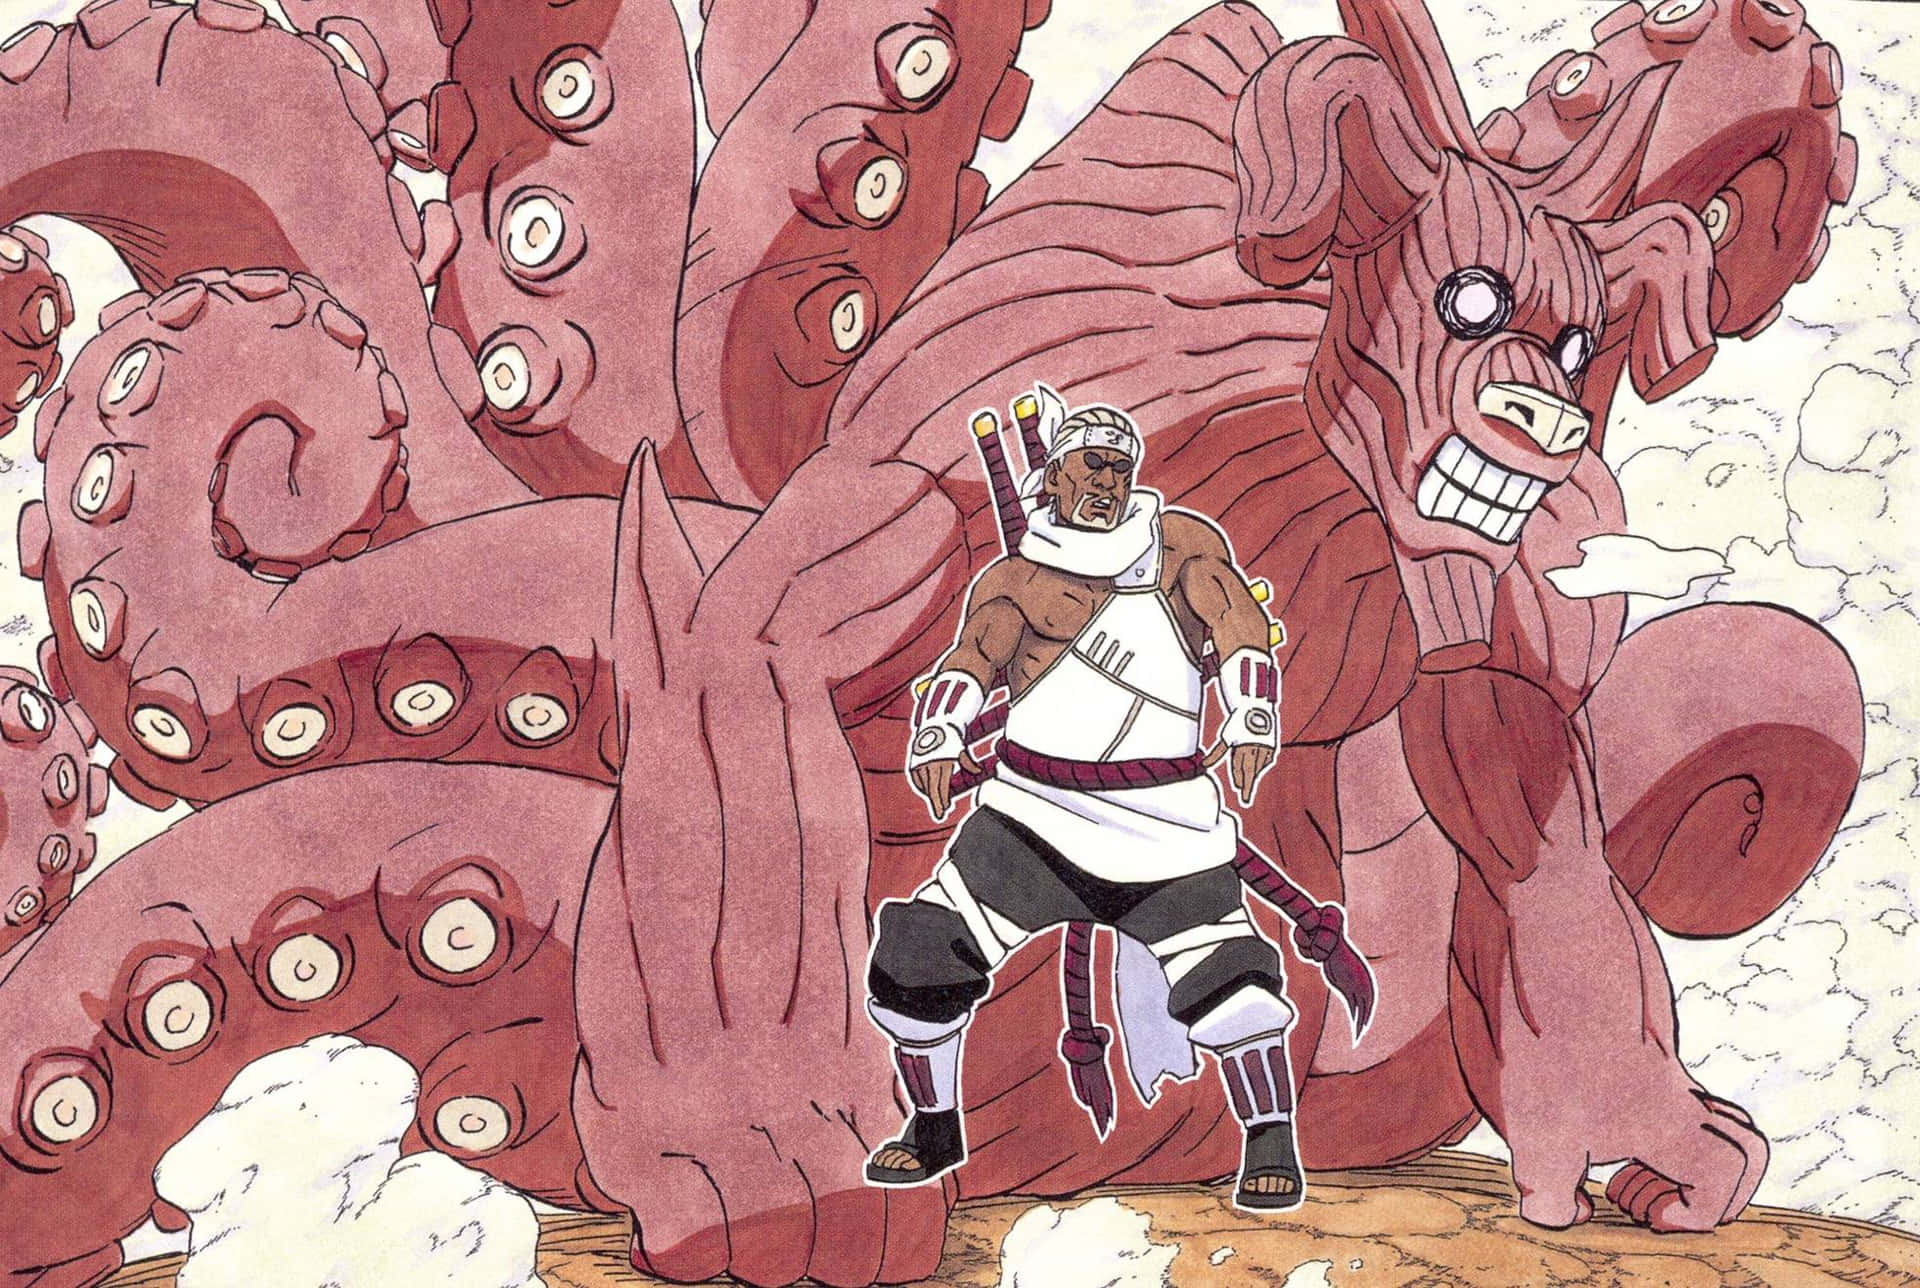 Team 7 battling the powerful Tailed Beasts Wallpaper